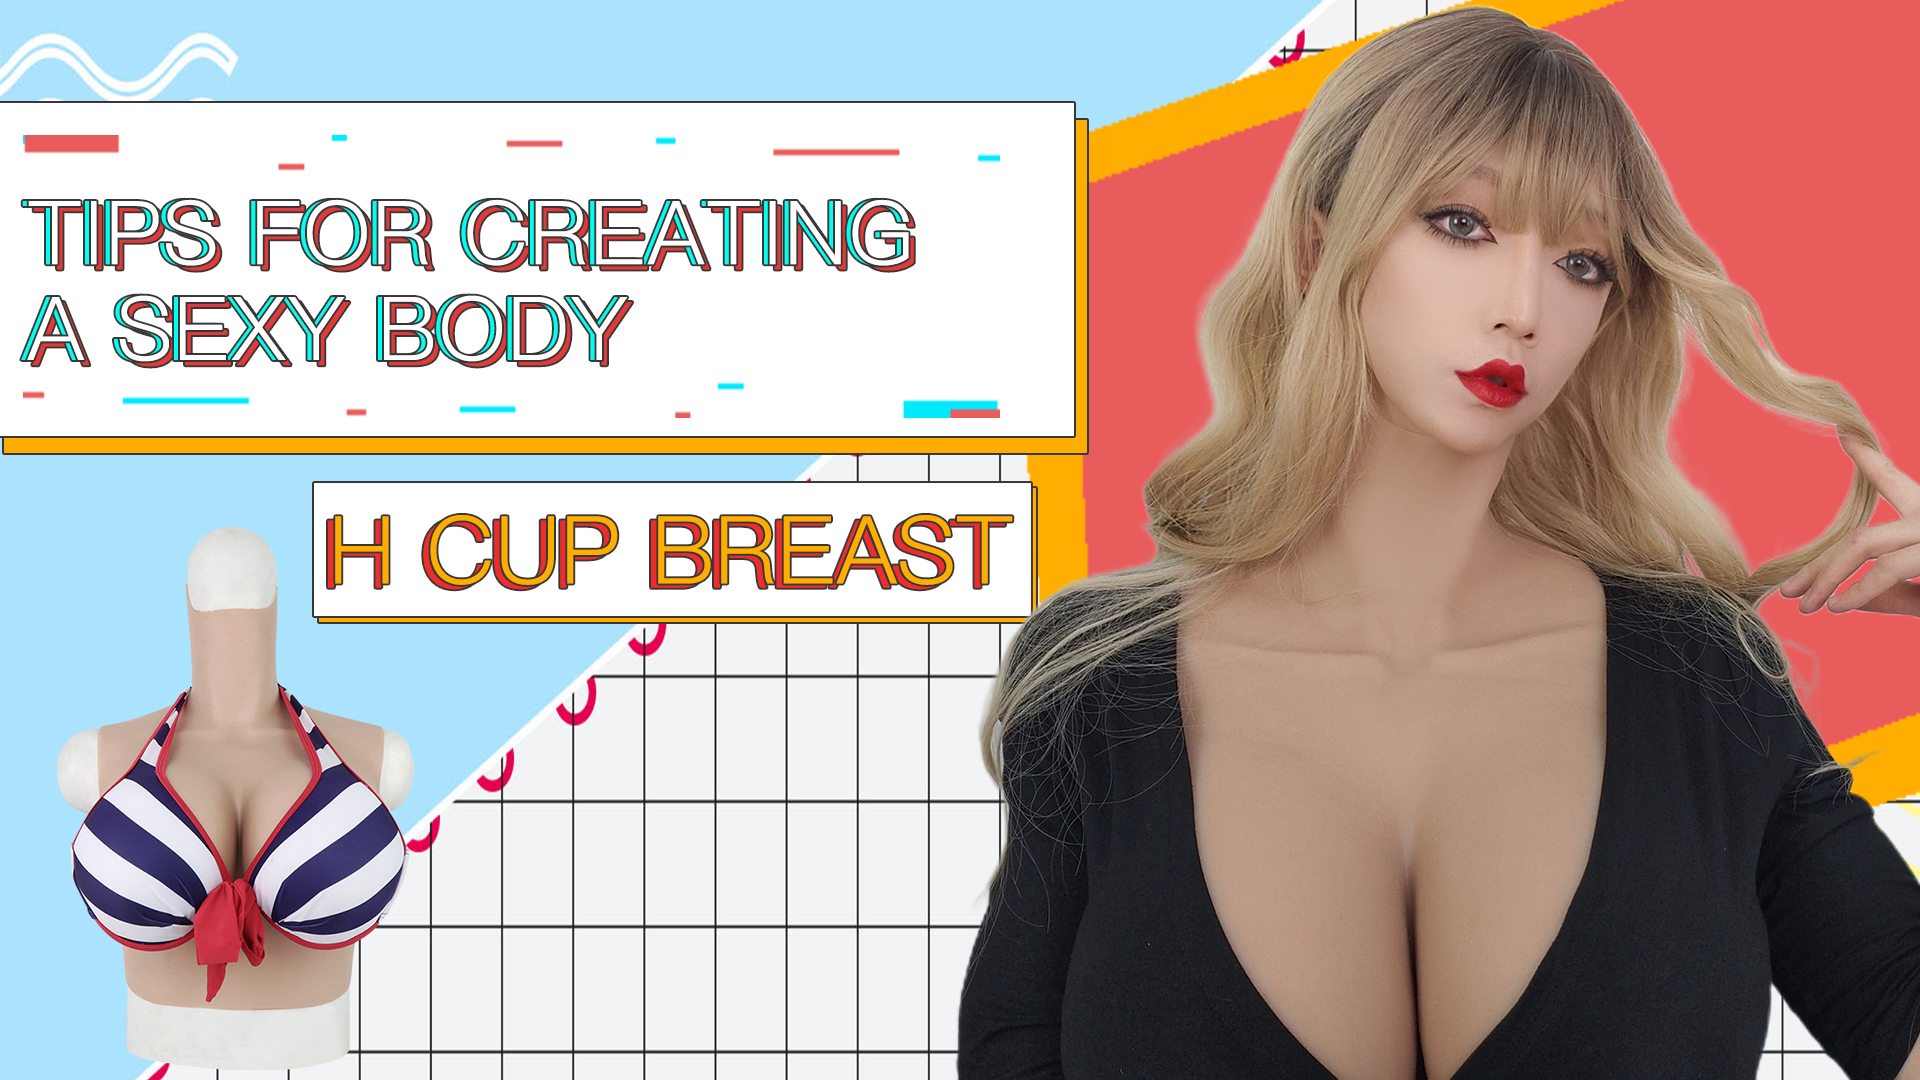 ROANYER on X: 【Tips for creating a sexy body：H cup breast 】If you don't  want to have a sexy body through surgery, then roanyer H cup breast will be  your best choice.